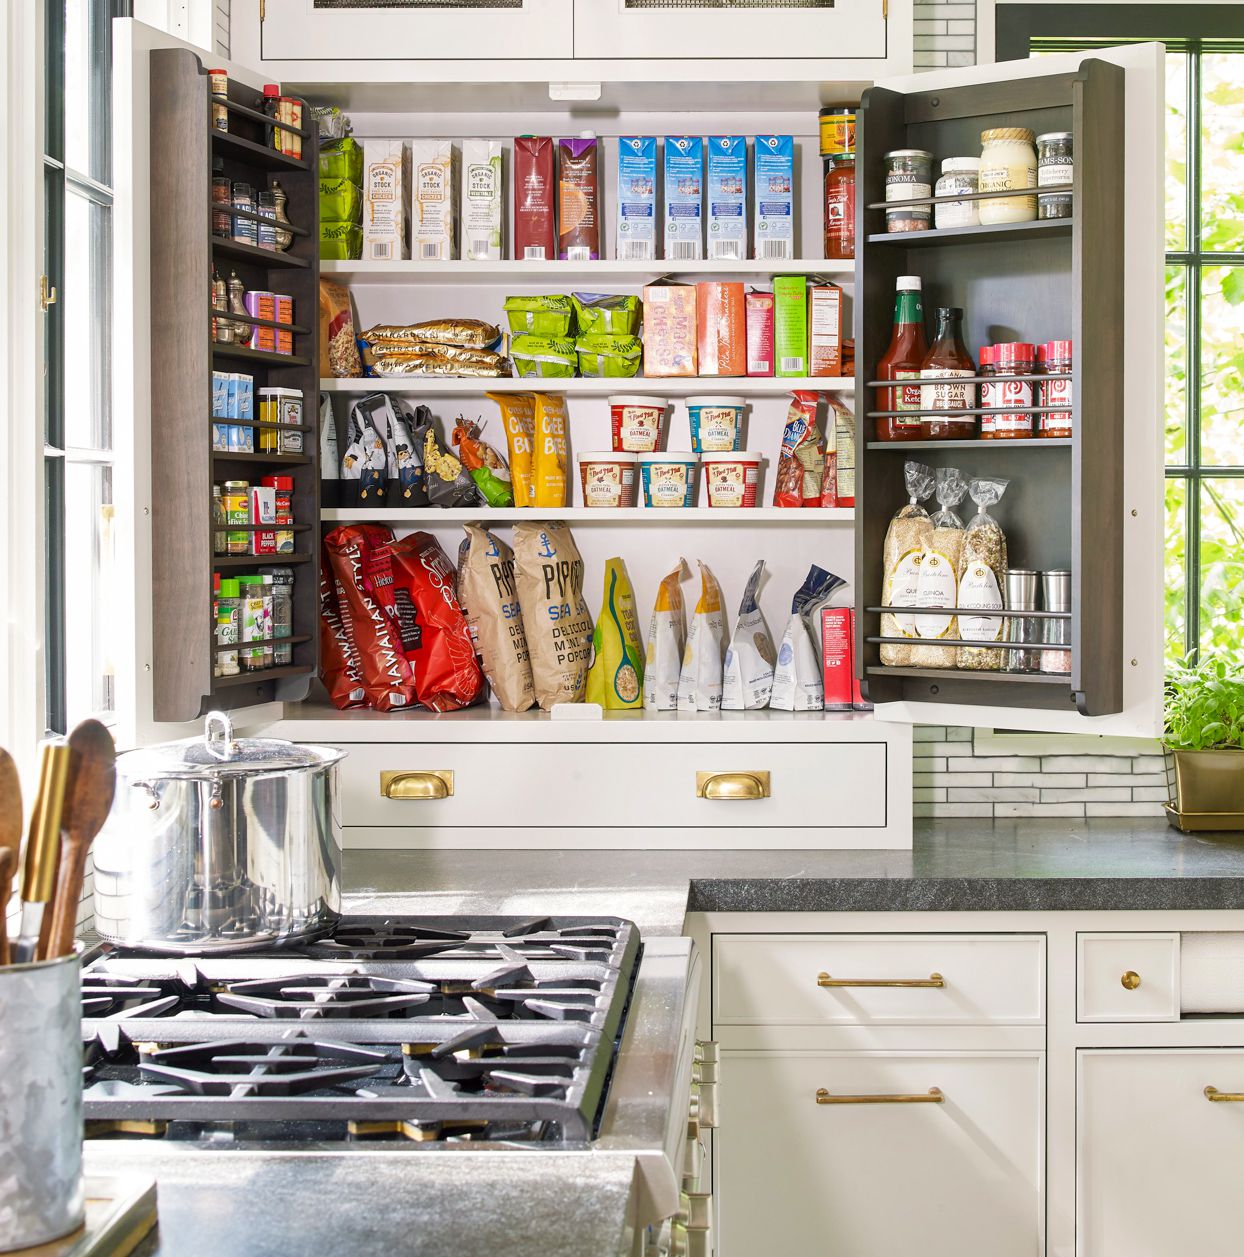 How Do You Convert Cabinets to Pantry